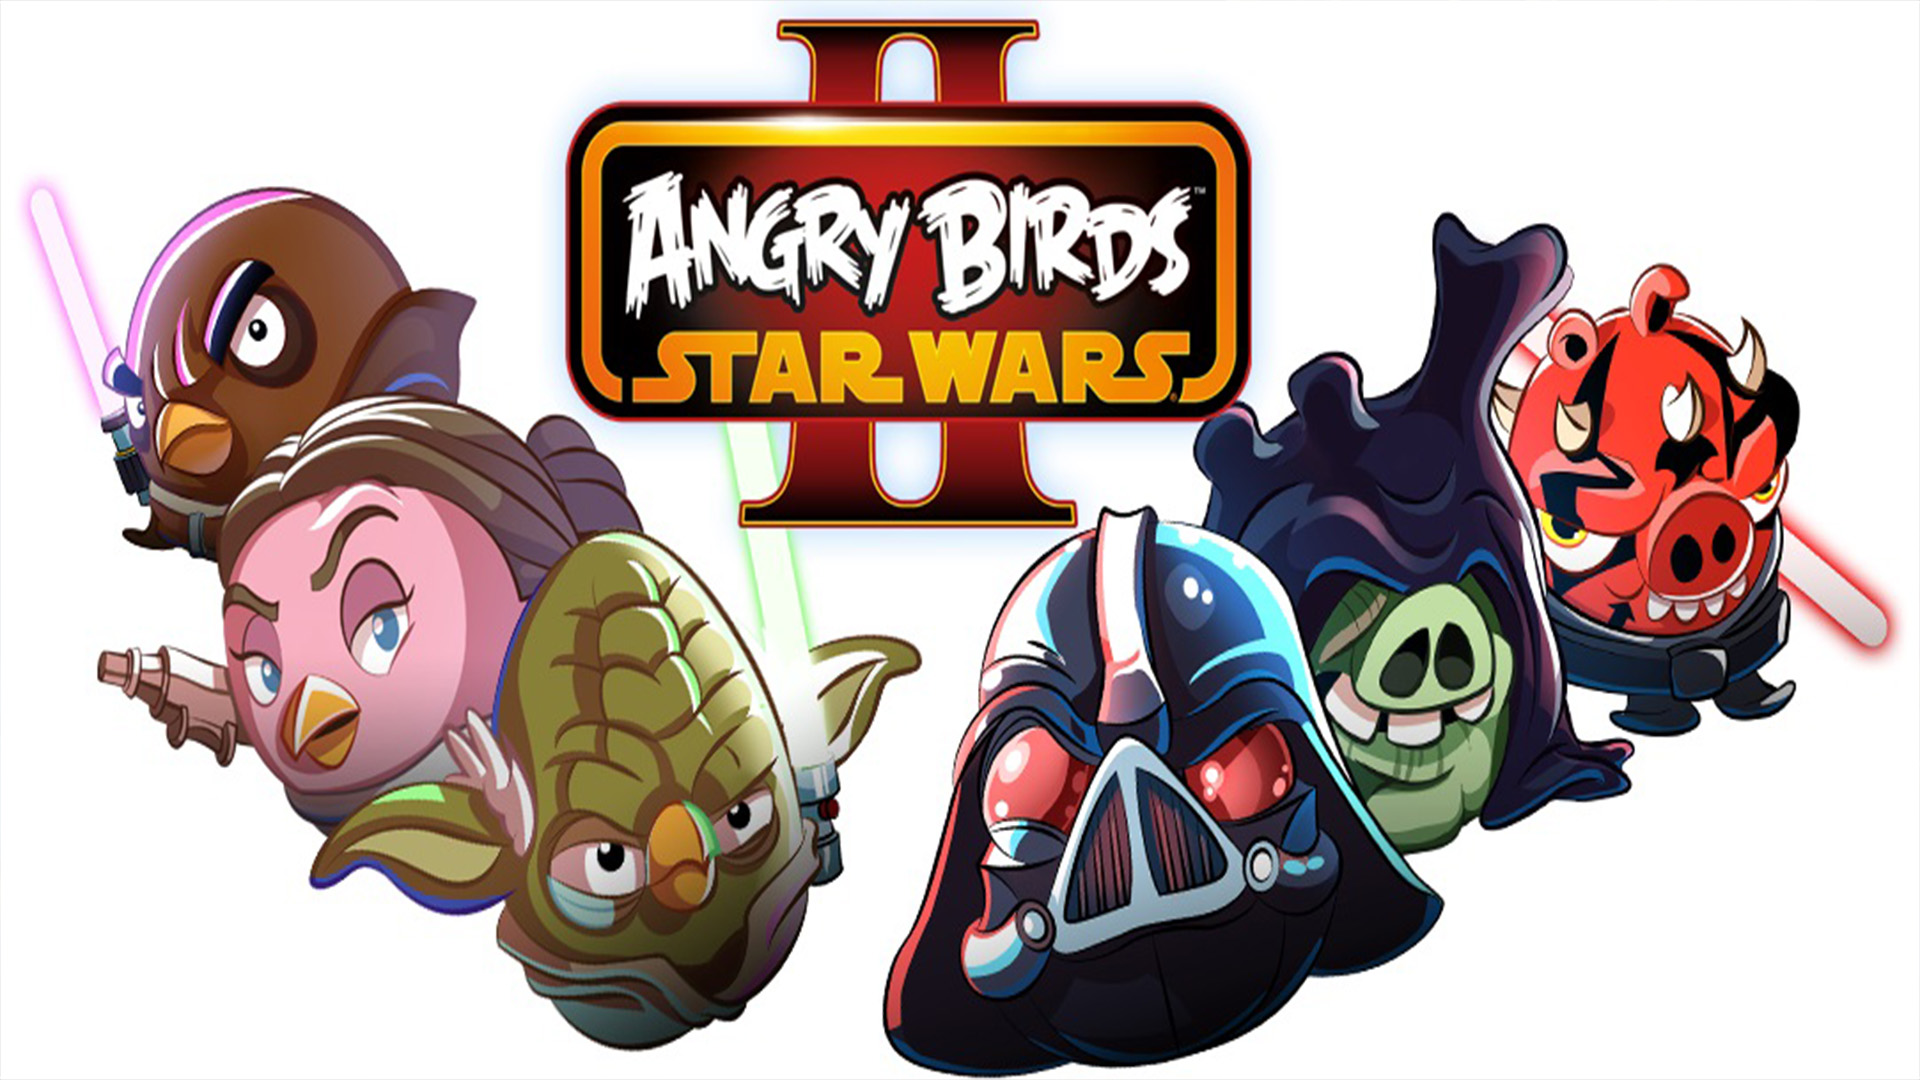 Video Game Angry Birds: Star Wars 2 HD Wallpaper Background Image.